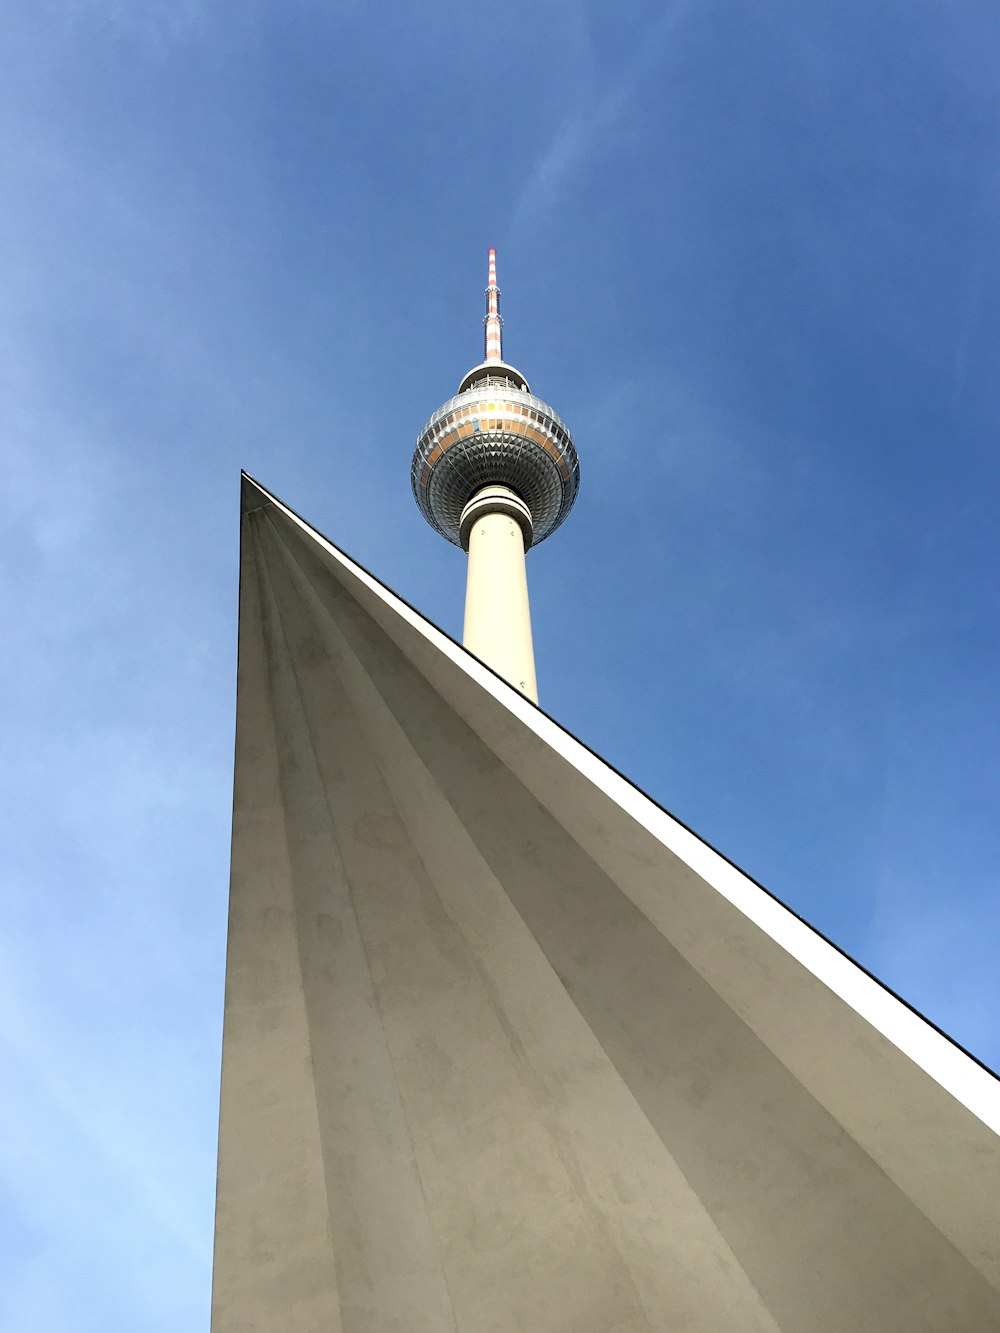 white concrete tower under blue sky during daytime